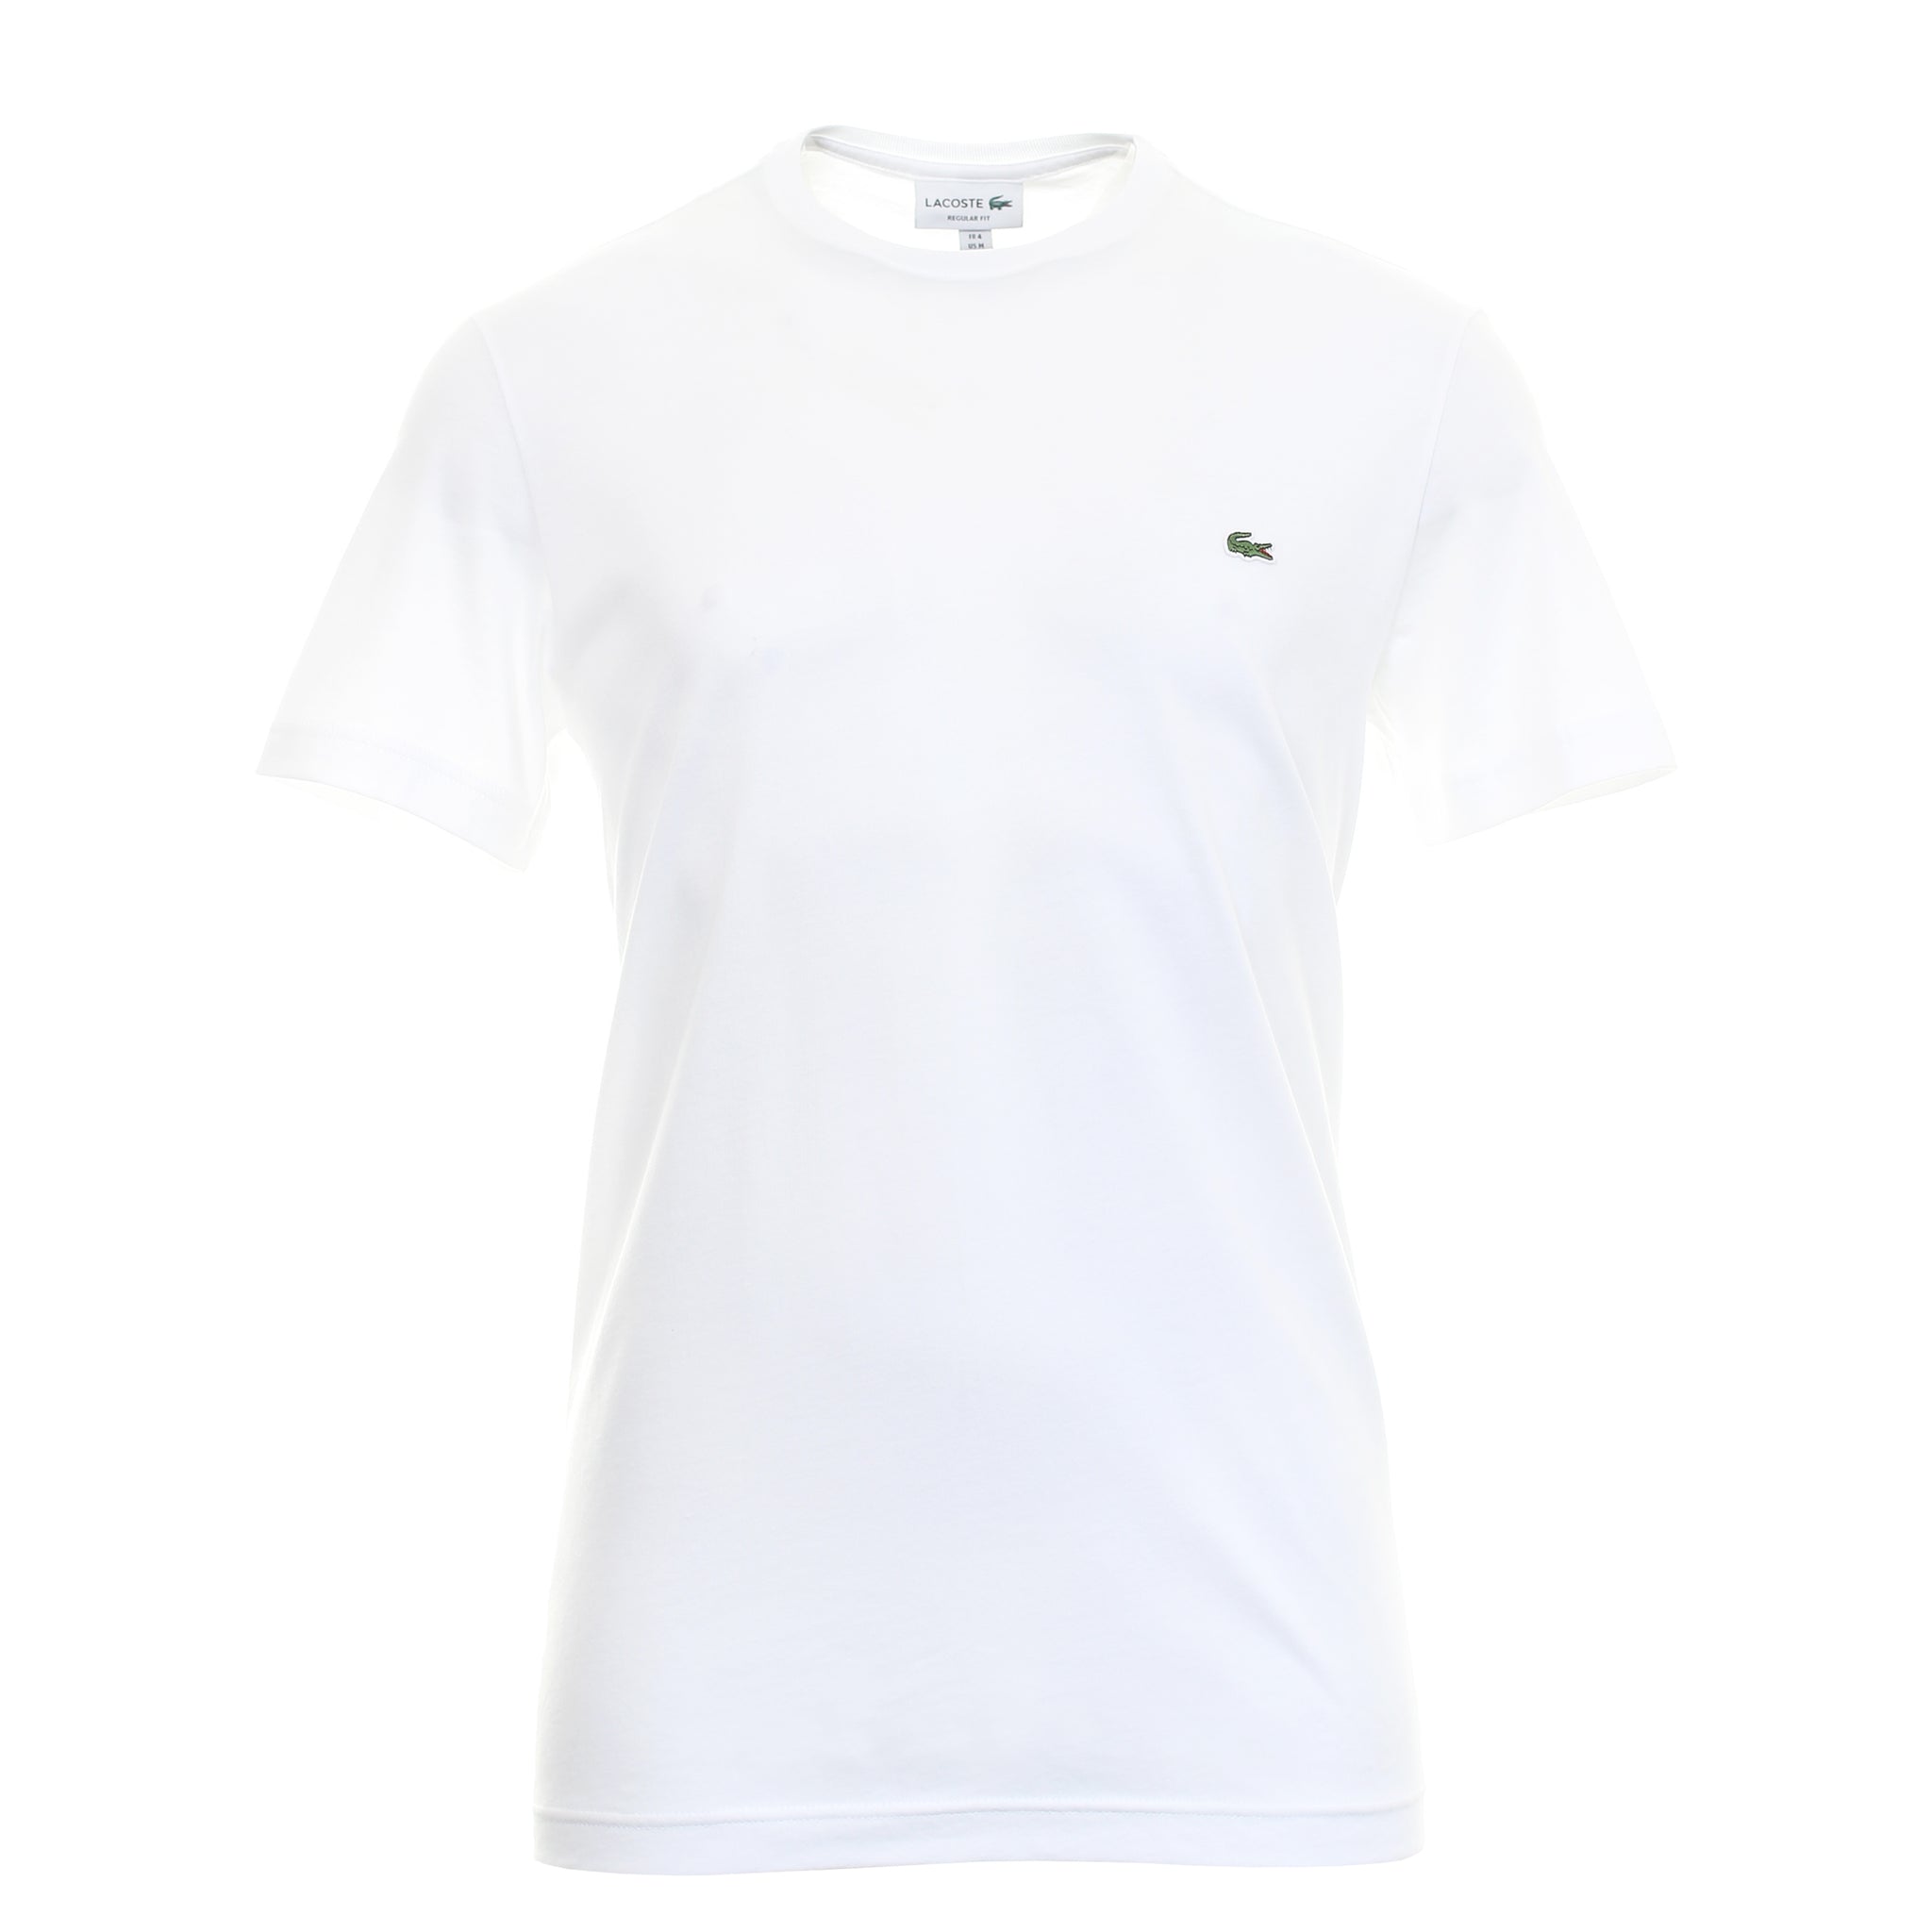 Lacoste Basic Cotton Tee Shirt TH2038 White 001 | Function18 | Restrictedgs